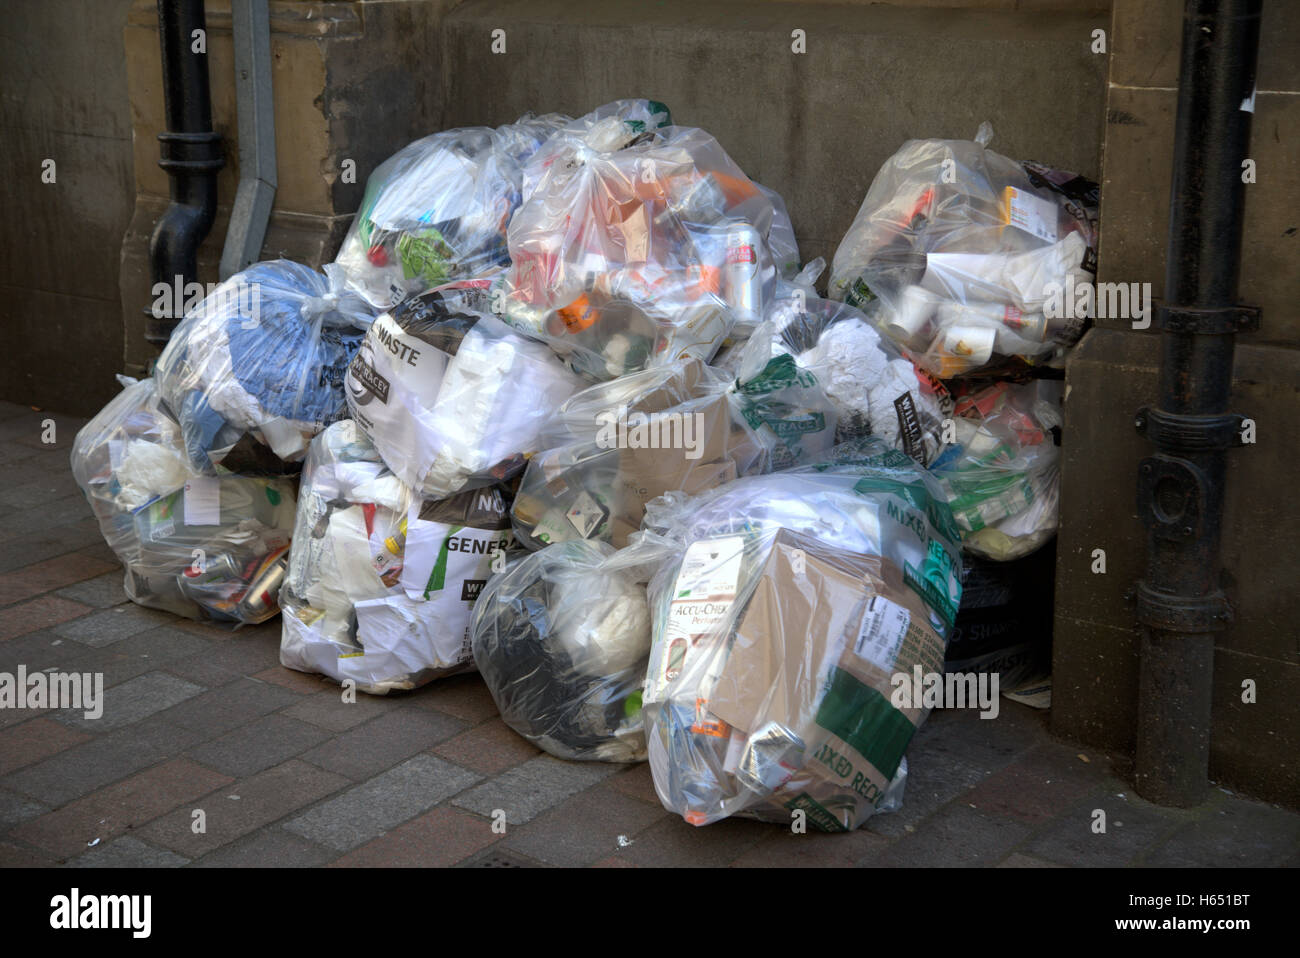 Bags of rubbish in tiled alley near drain pipes Stock Photo